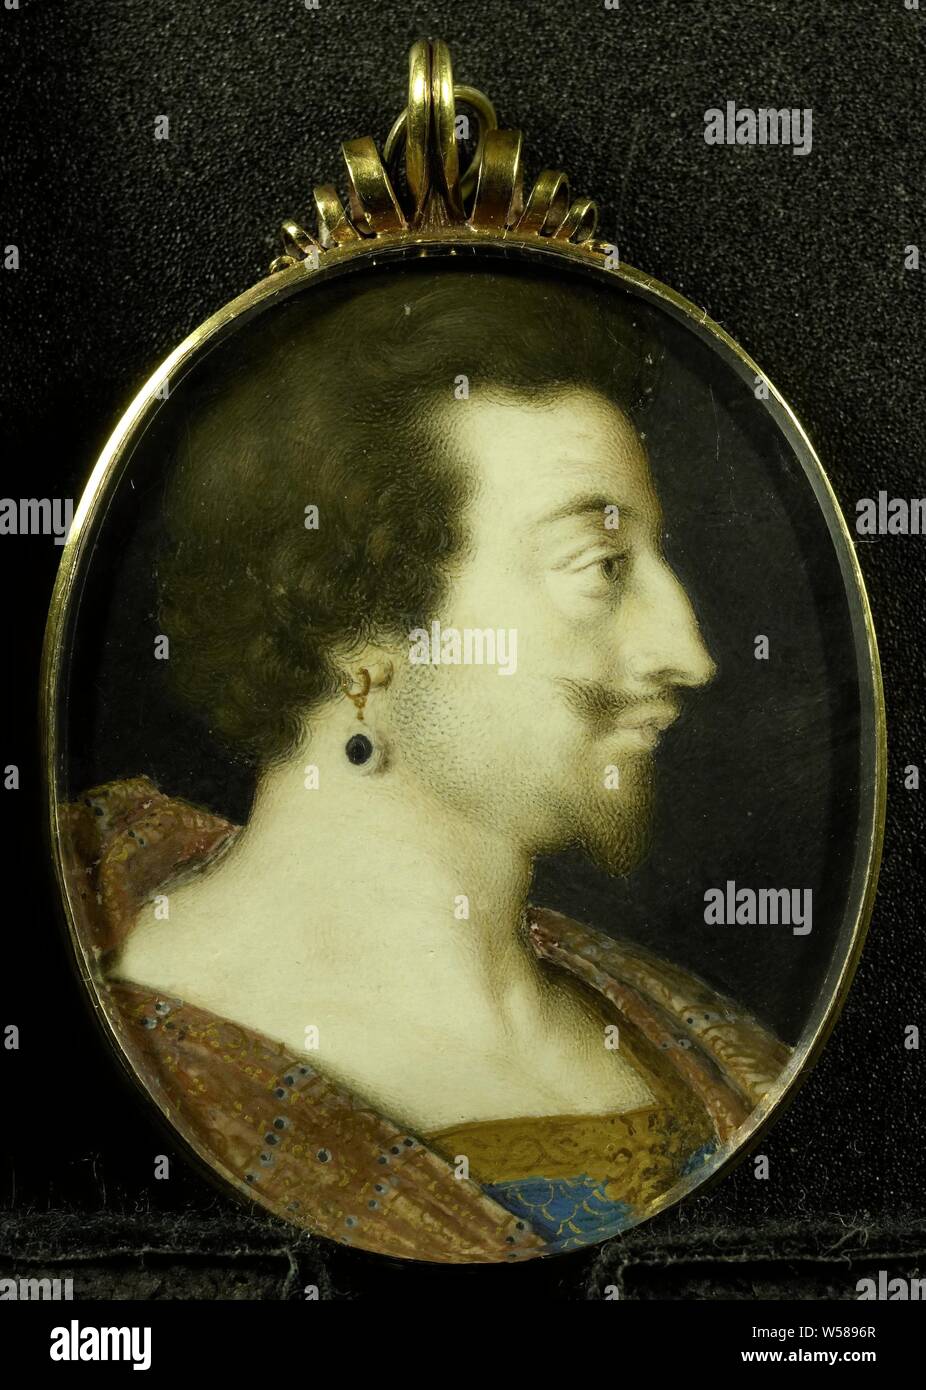 George Villiers (1592-1628), Duke of Buckingham, Portrait of George Villiers (1592-1628), Duke of Buckingham. Bust, in profile to the right, with earring. Part of the portrait portrait collection, George Villiers (1st Duke of Buckingham), Peter Oliver, 1612 - 1647, cardboard, gold (metal), glass, h 5.1 cm × w 4.1 cm h 6.5 cm × w 4.3 cm × d 0.8 cm Stock Photo